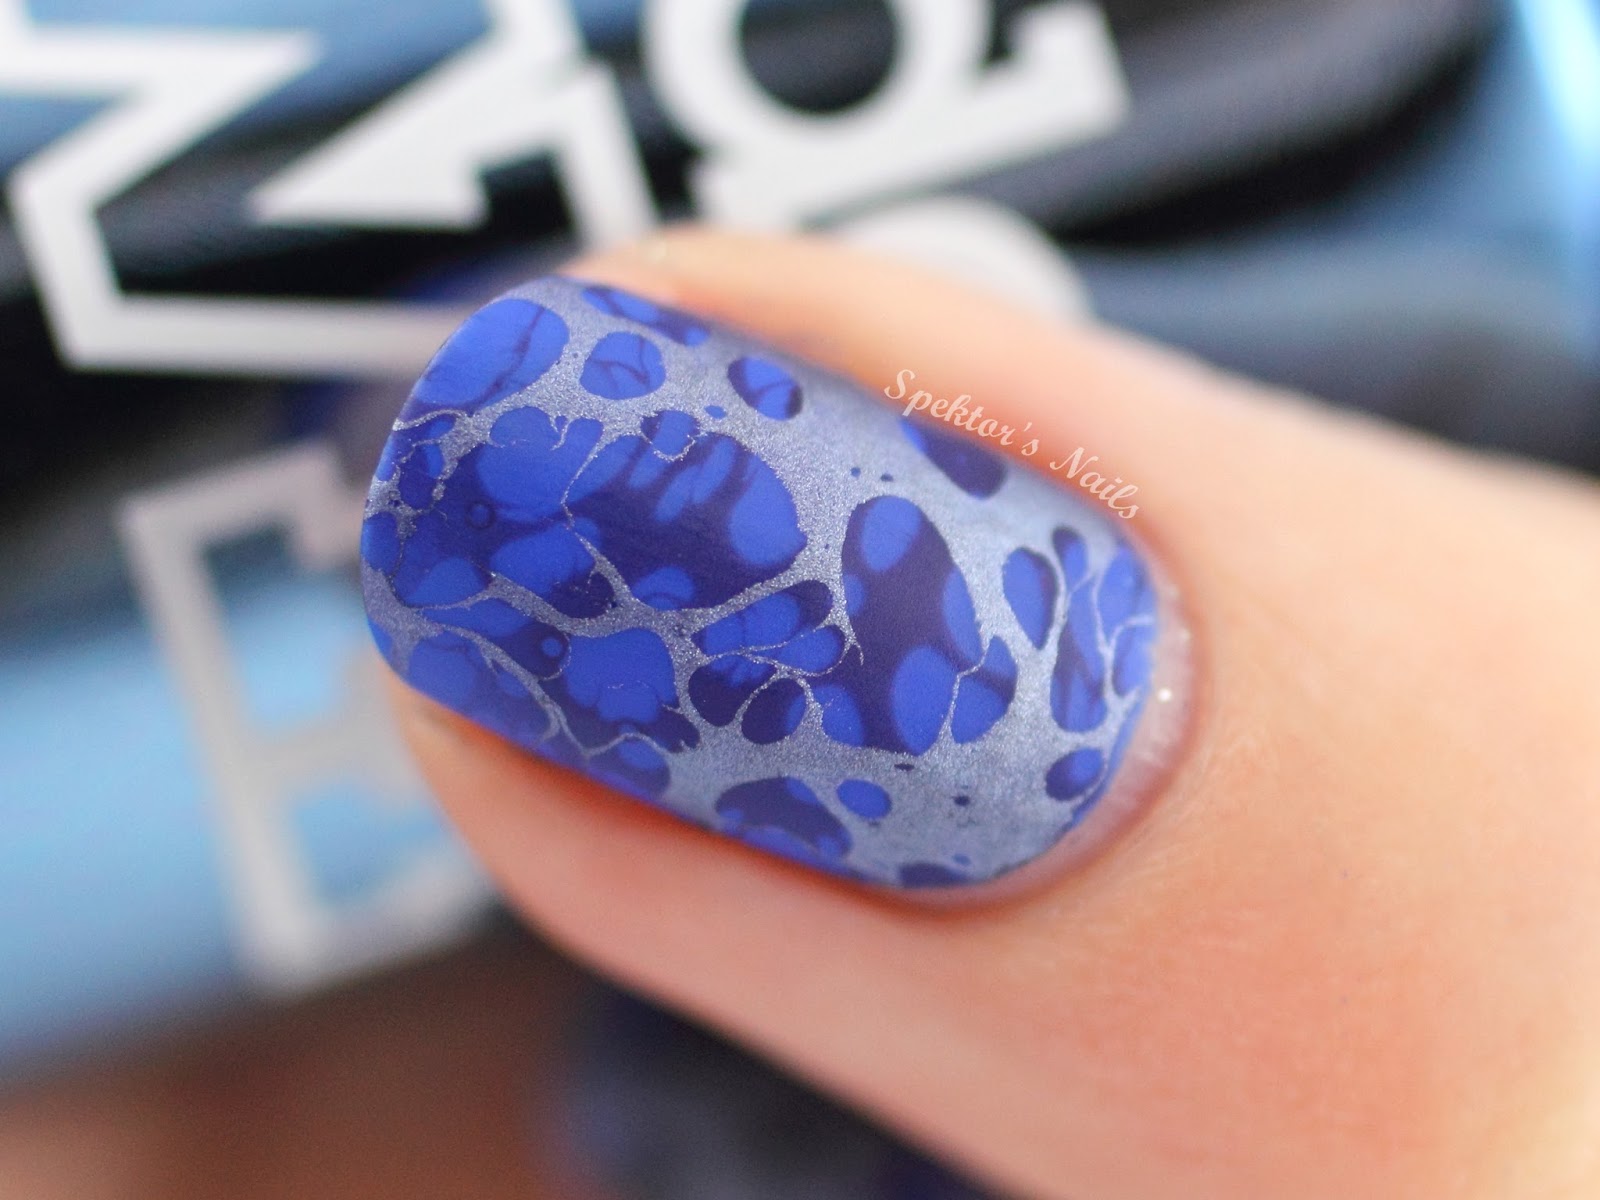 Water Spotted Nail Art feat. Model's Own - Chrome Indigo